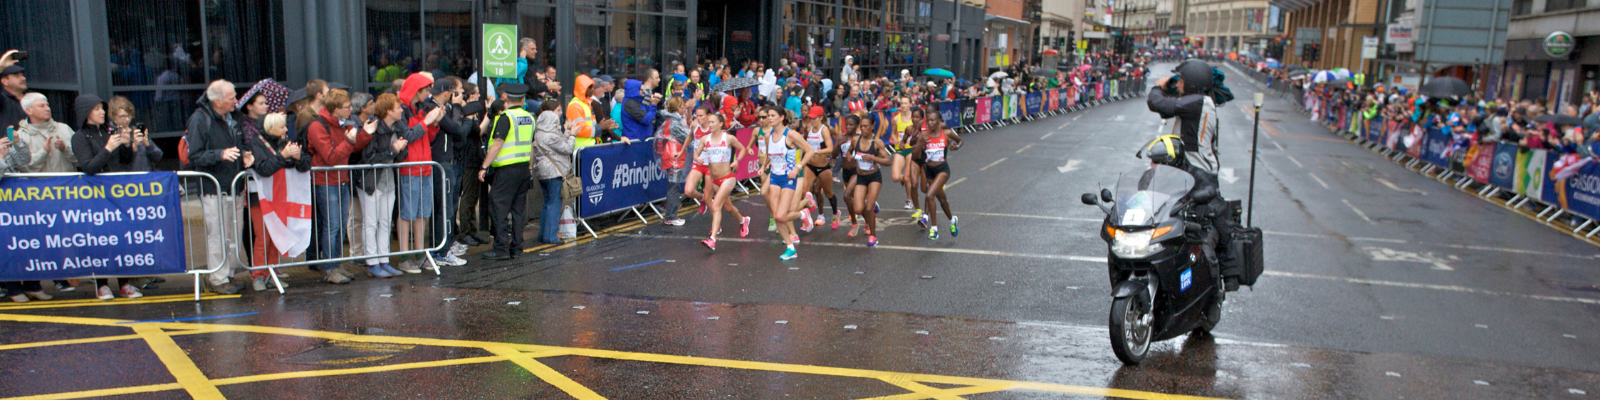 SmartWeld Barriers lining the route of the marathon at the Glasgow Commonwealth Games